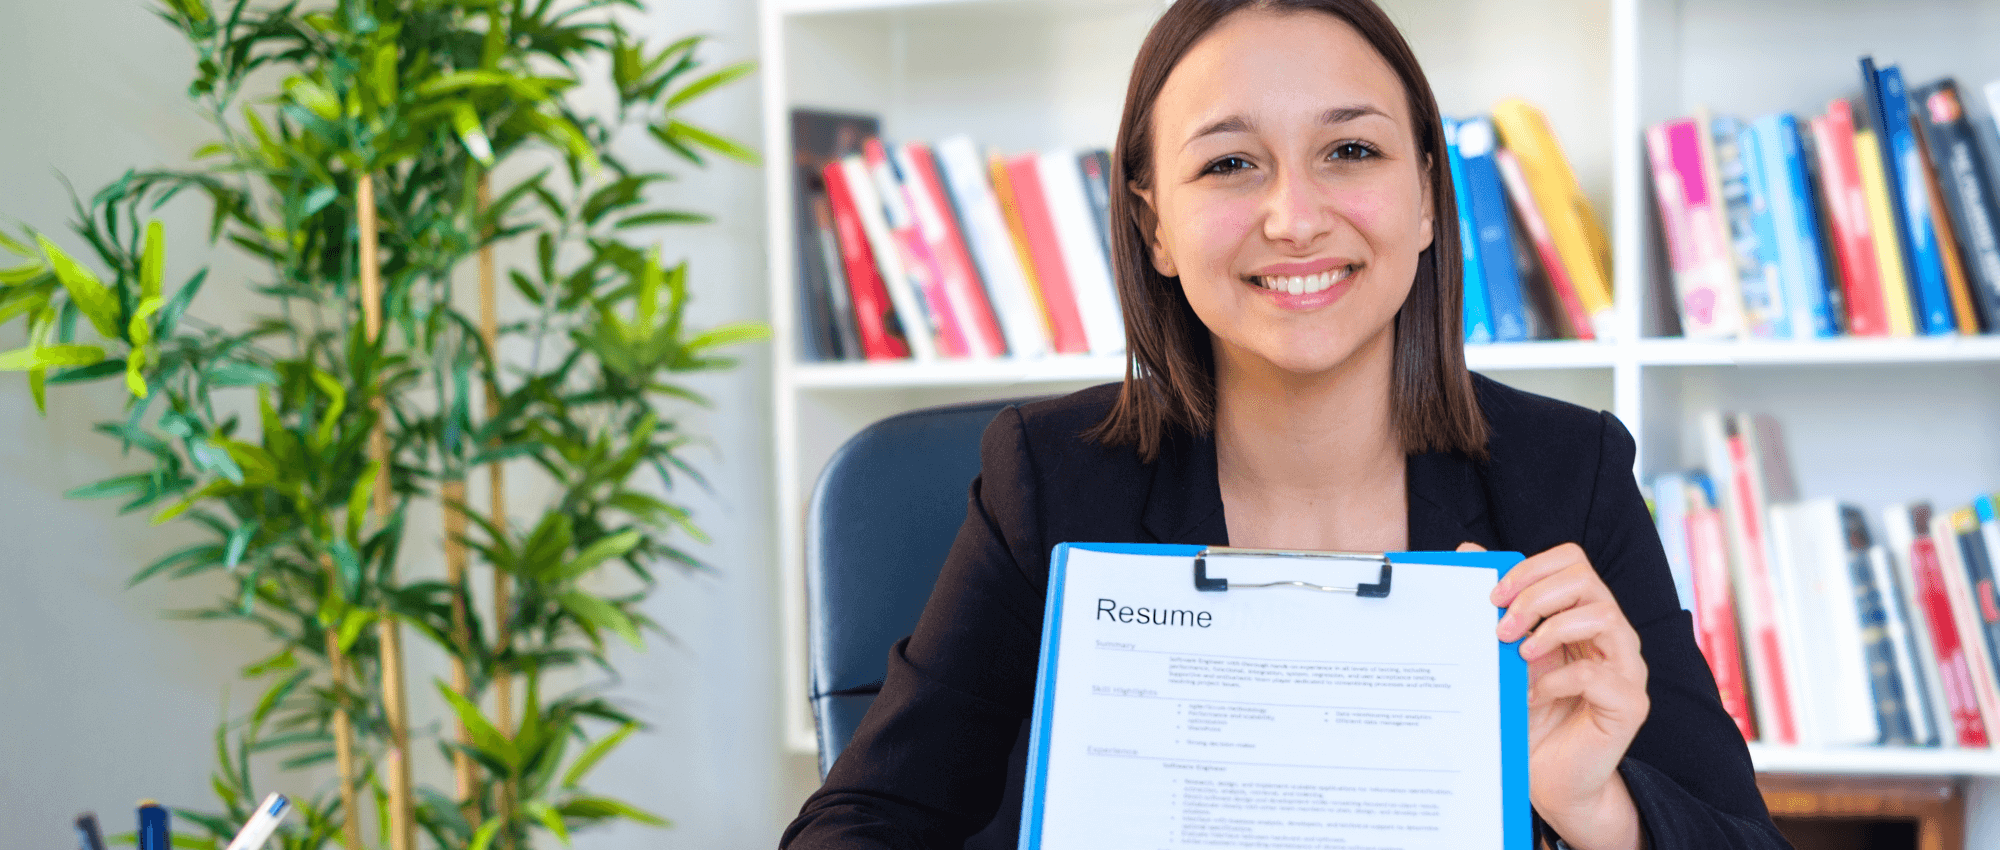 woman holding resume and smiling